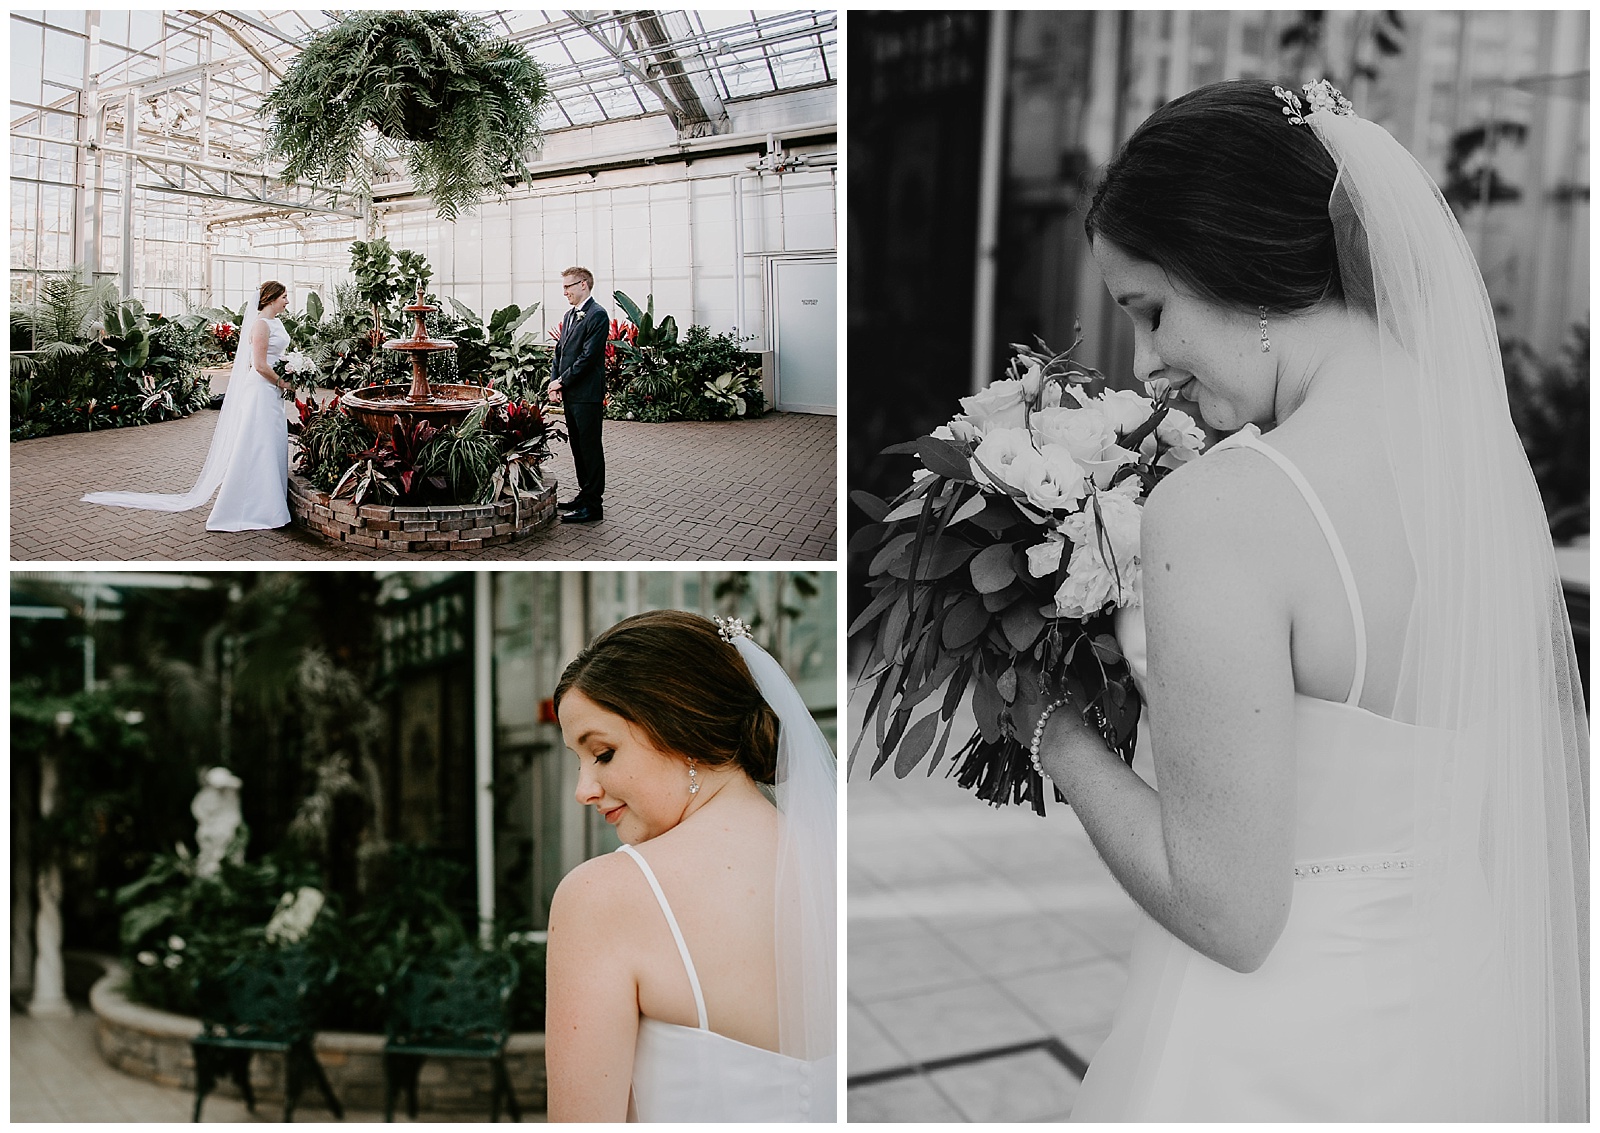 Bride at her elopement taken by Liv Lyszyk Photography